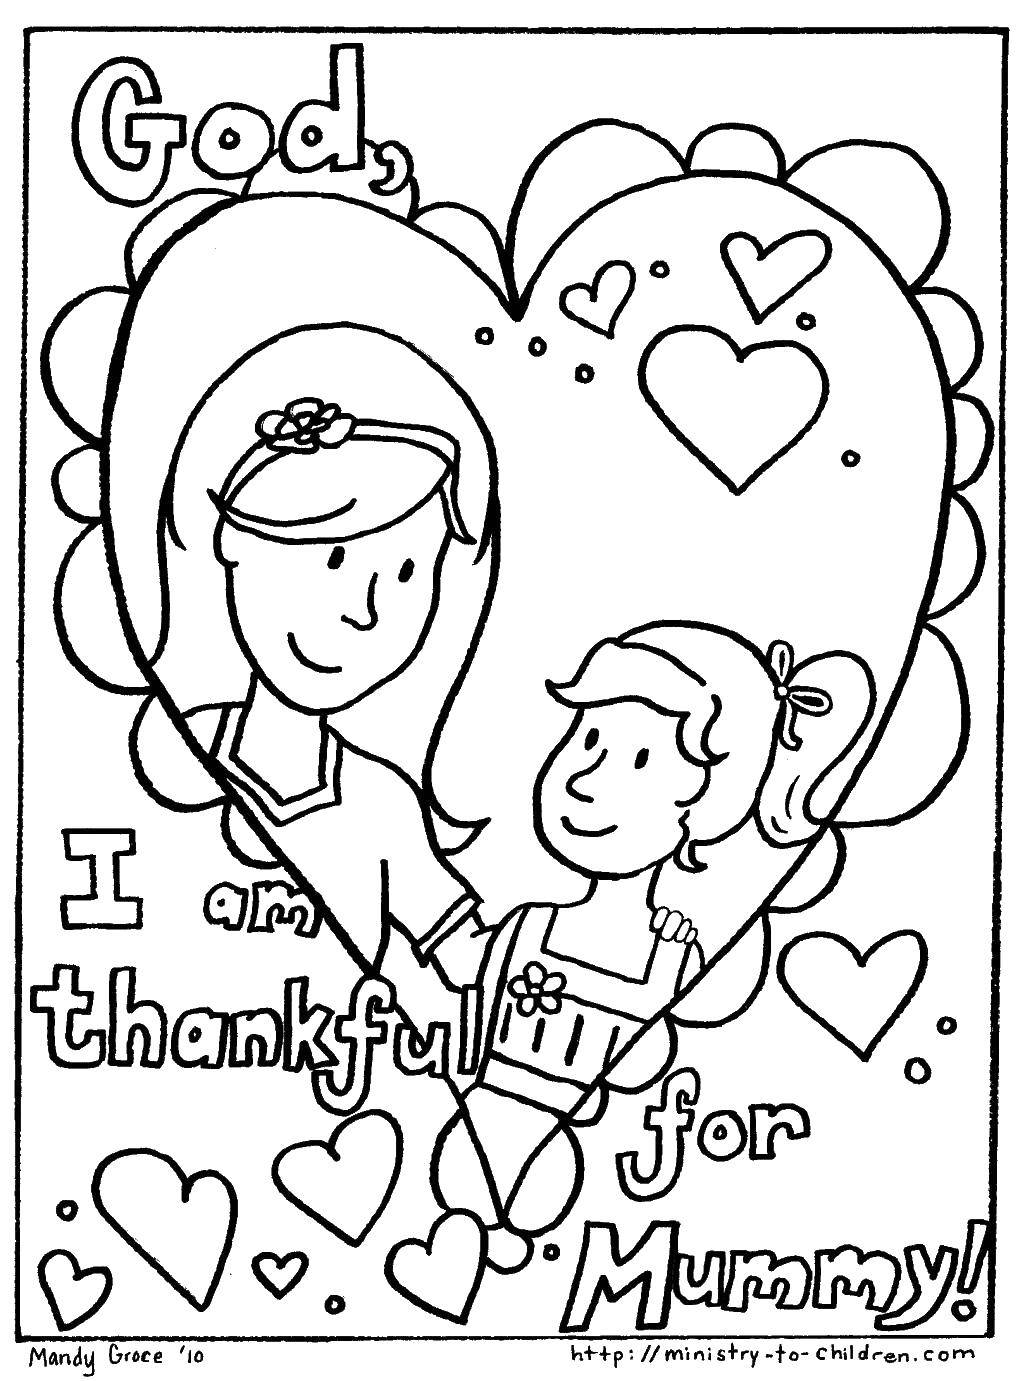 Coloring Daughter with her mother in the heart. Category coloring. Tags:  daughter , mother, heart.